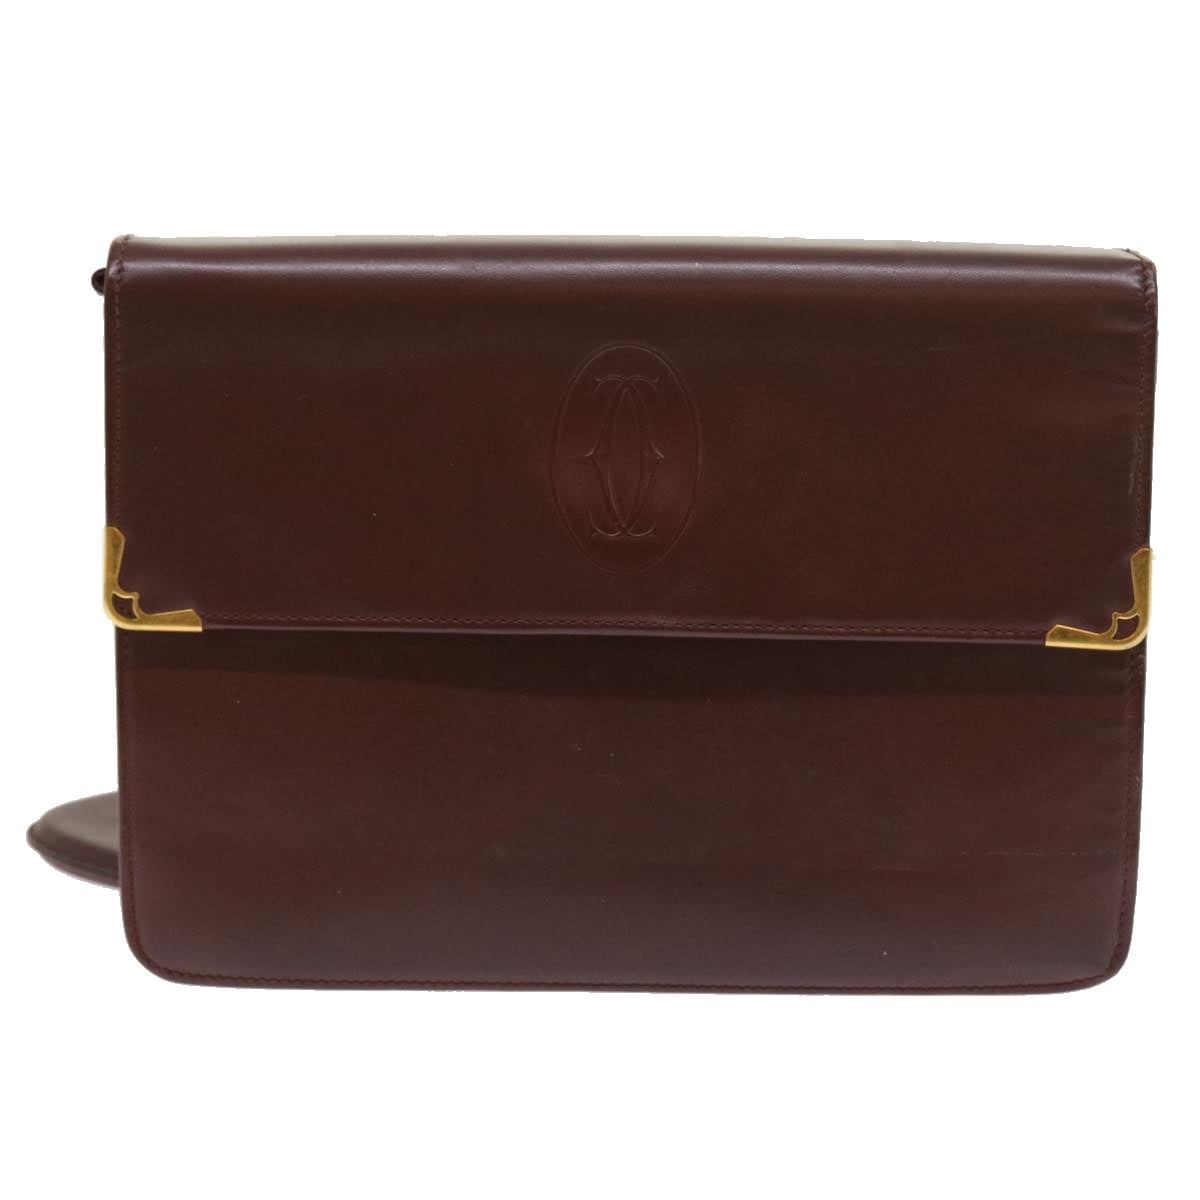 CARTIER Clutch Bag Leather Wine Red Auth 55608 - 0